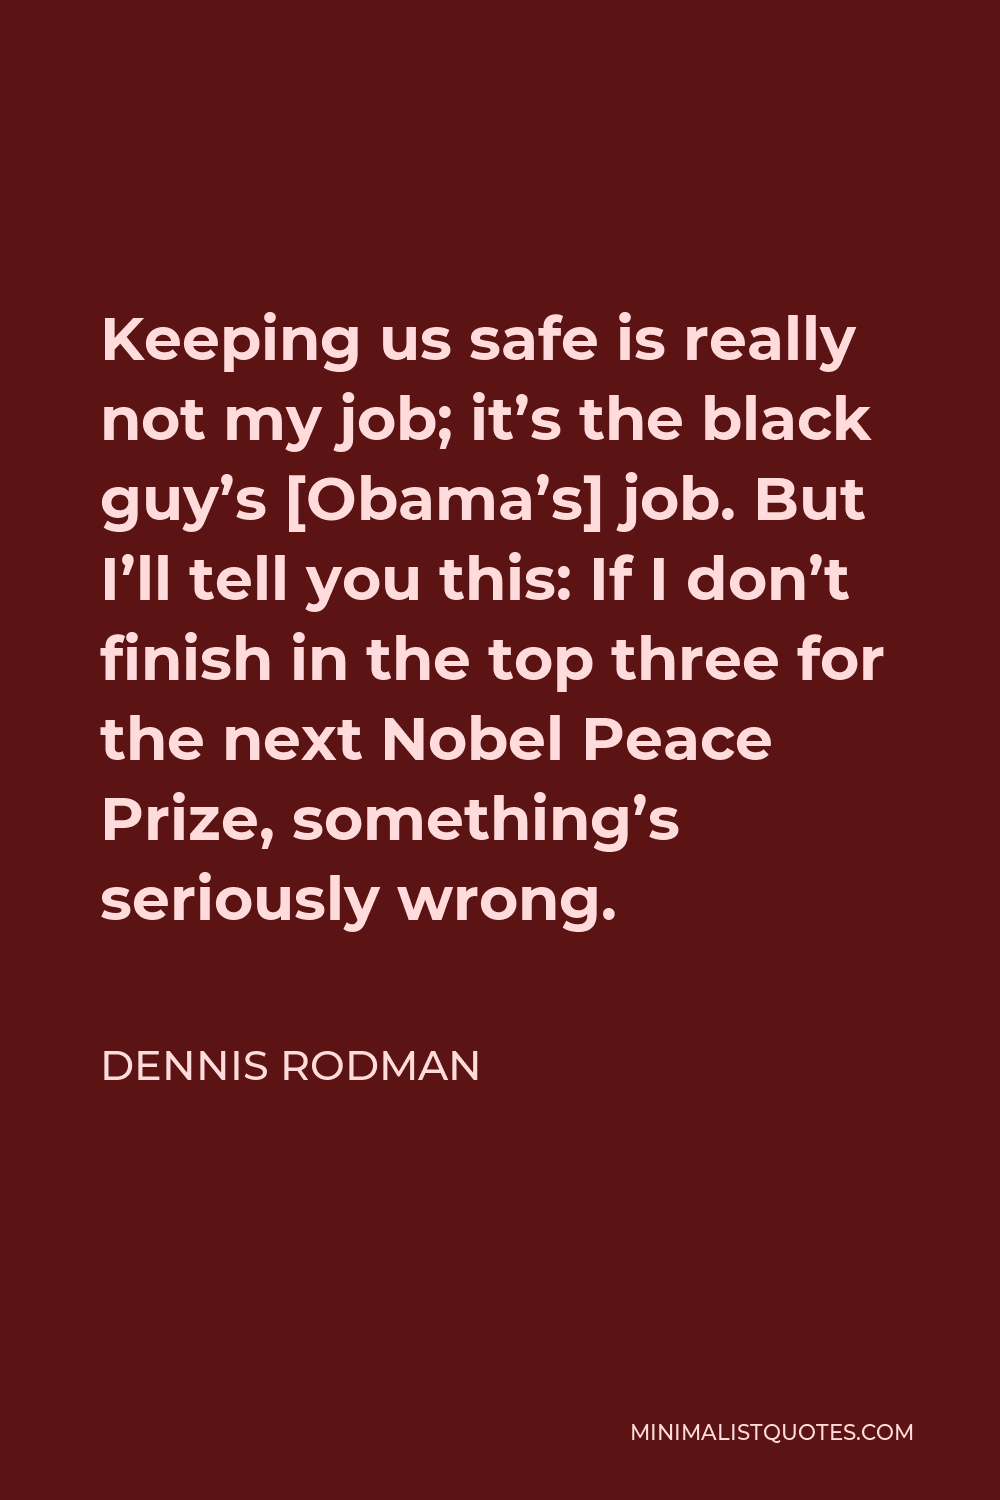 Dennis Rodman Quote - Keeping us safe is really not my job; it’s the black guy’s [Obama’s] job. But I’ll tell you this: If I don’t finish in the top three for the next Nobel Peace Prize, something’s seriously wrong.